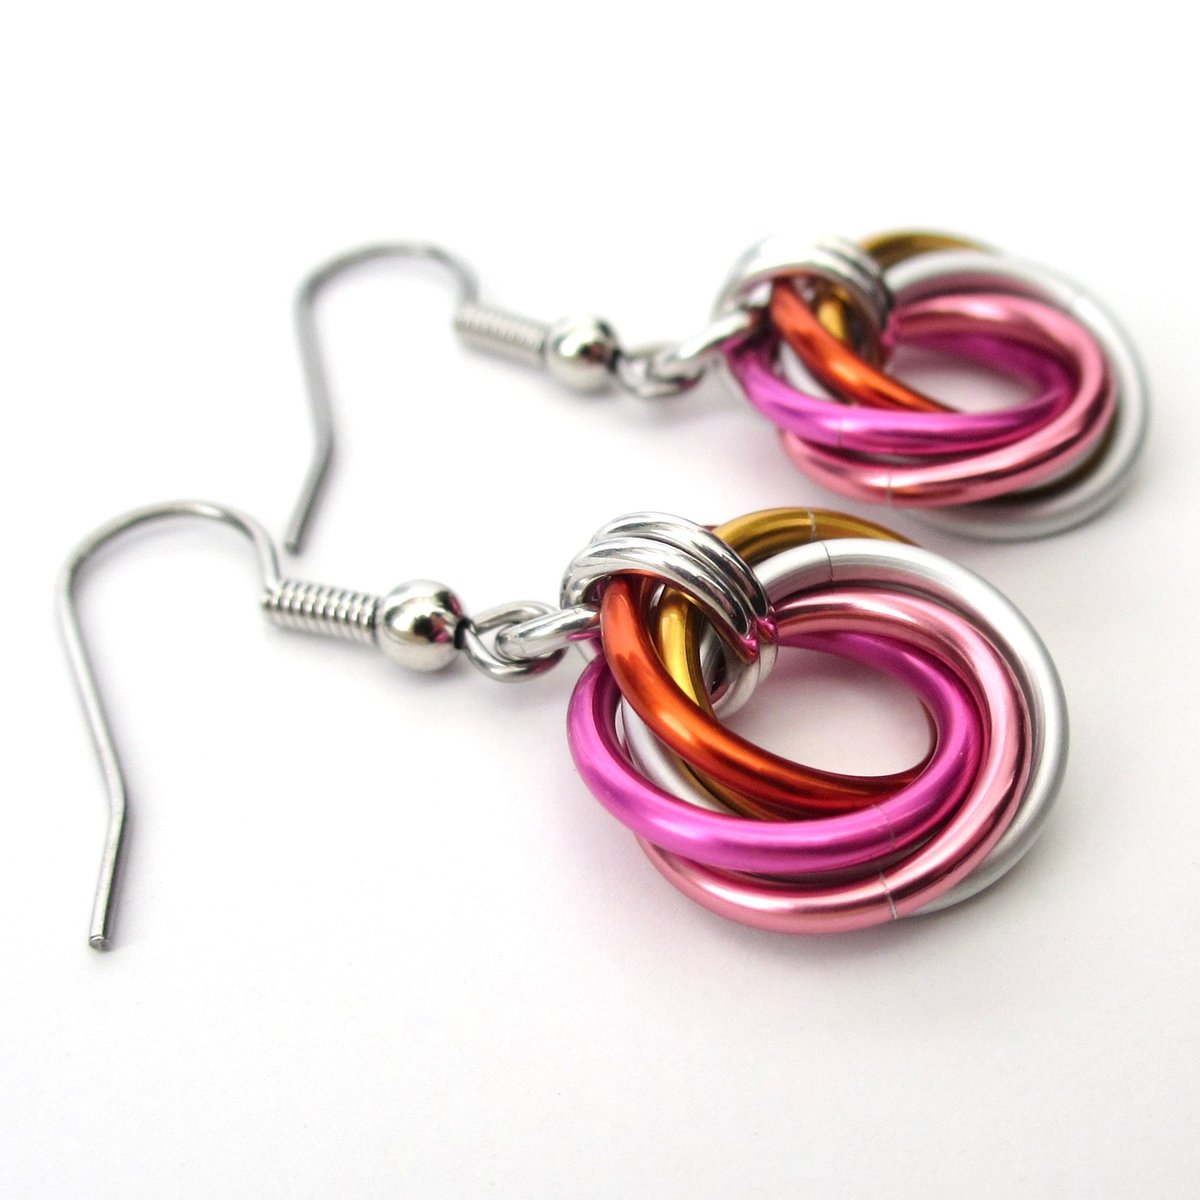 Lesbian earrings, LGBTQ pride chainmail love knot jewelry, 5 color sunset flag gifts